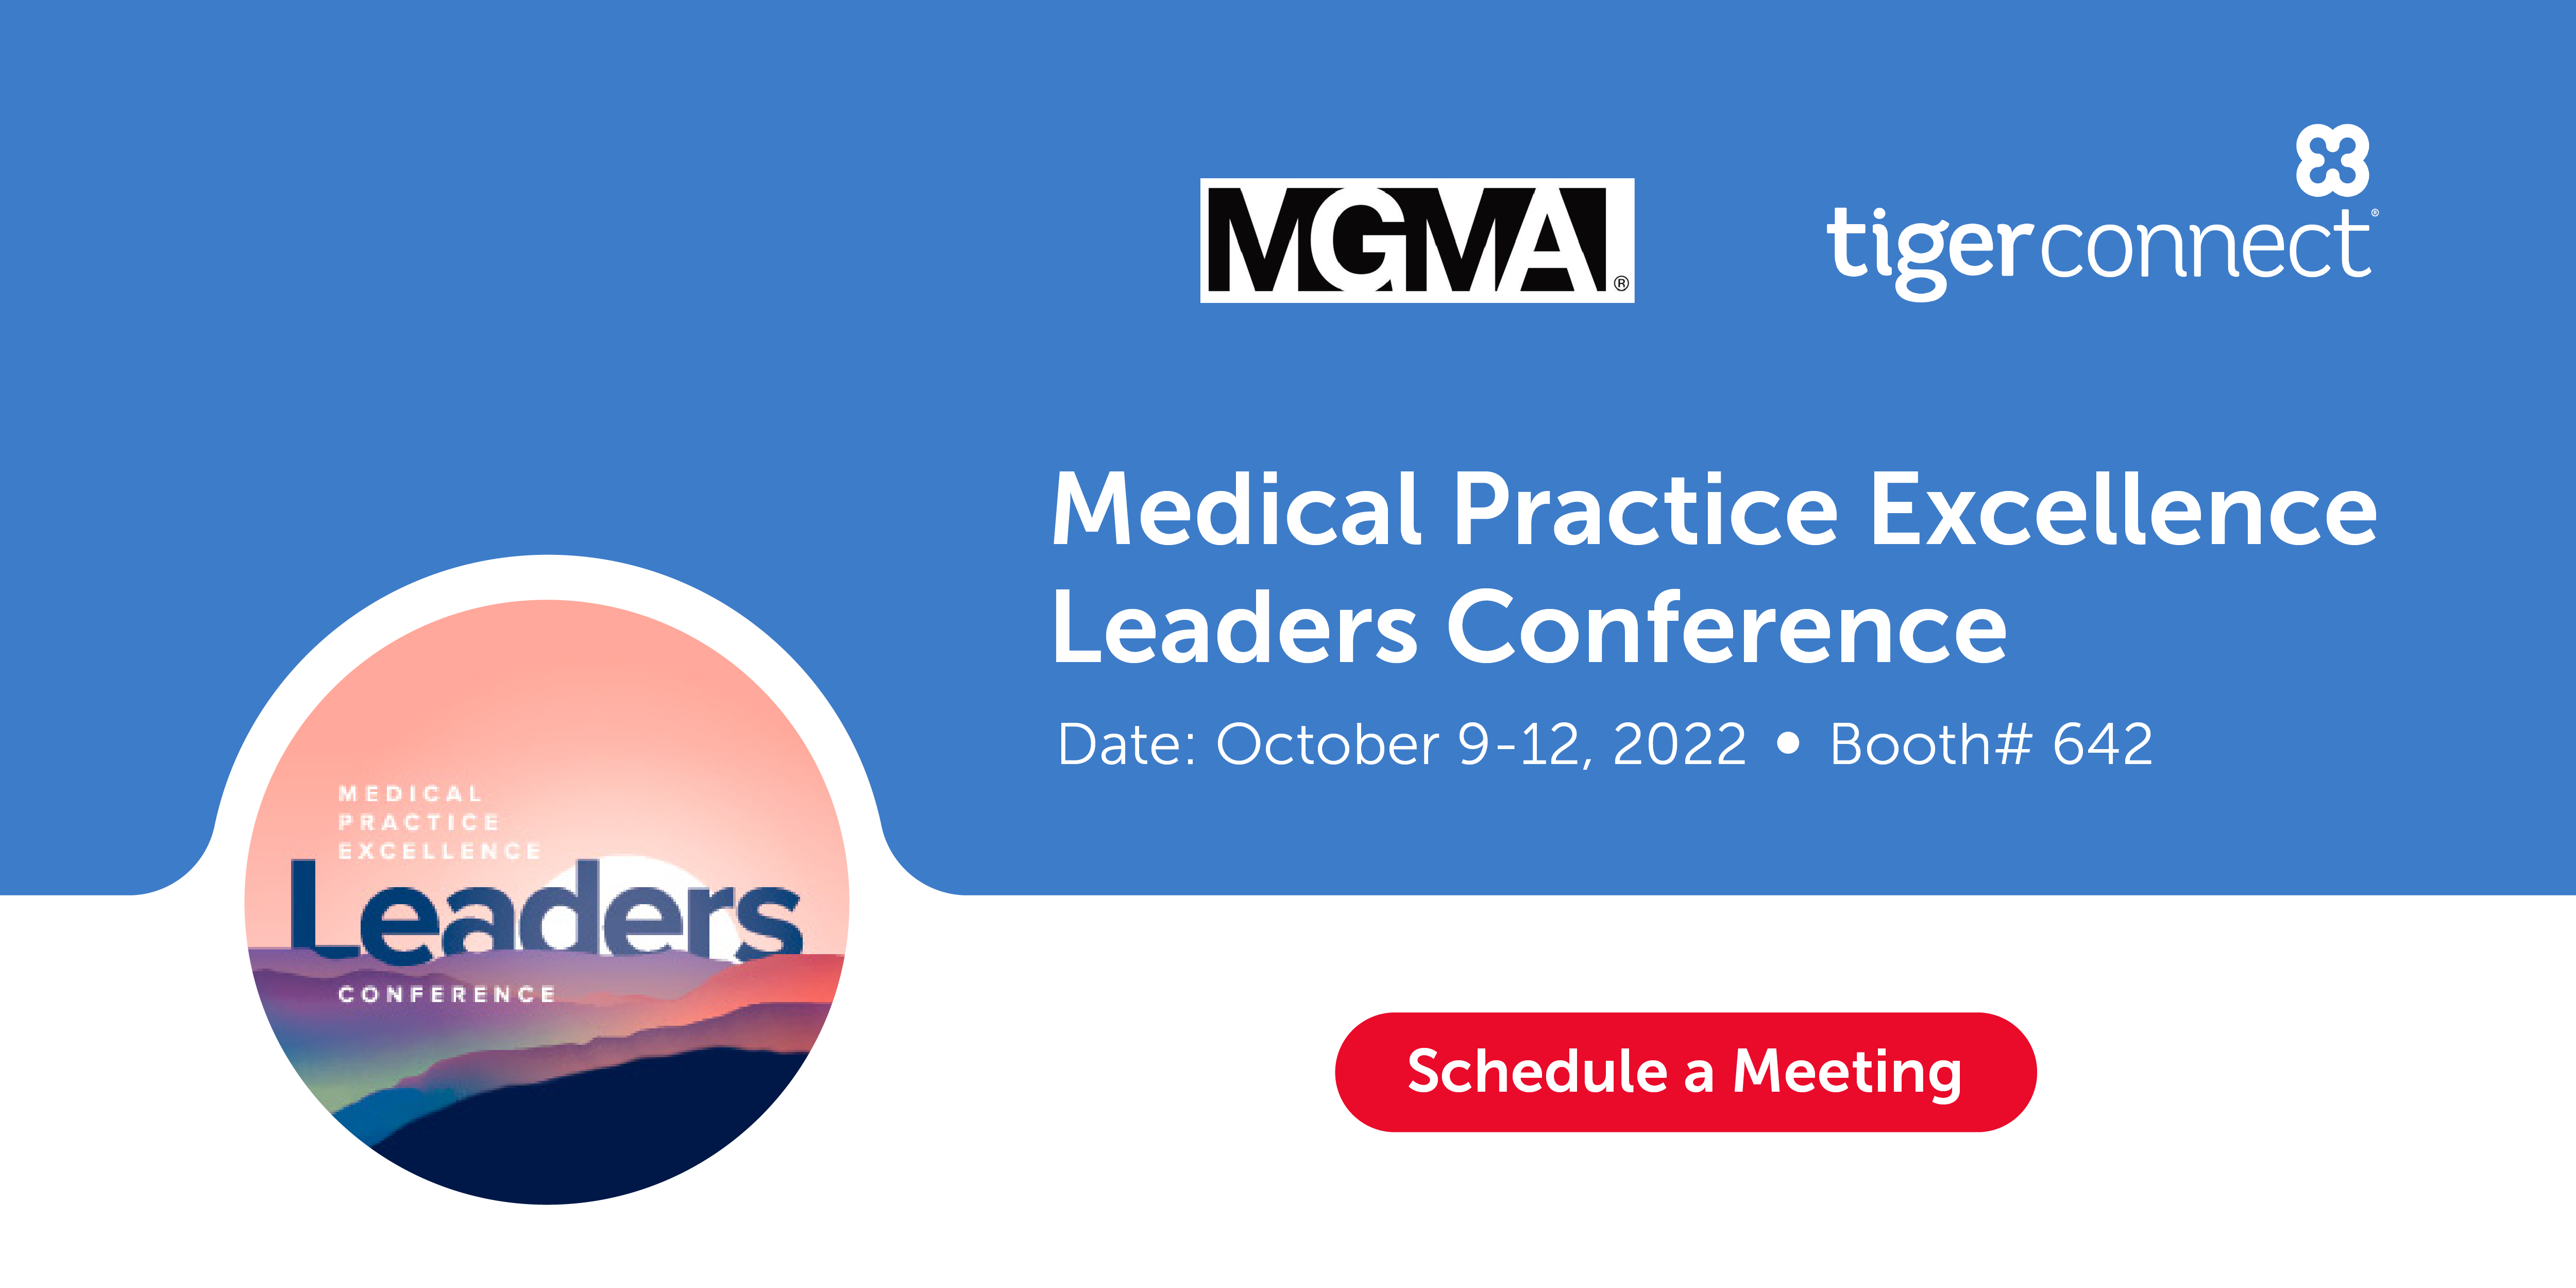 Meet us at MGMA Medical Practice Excellence Leaders Conference, Sun, 9